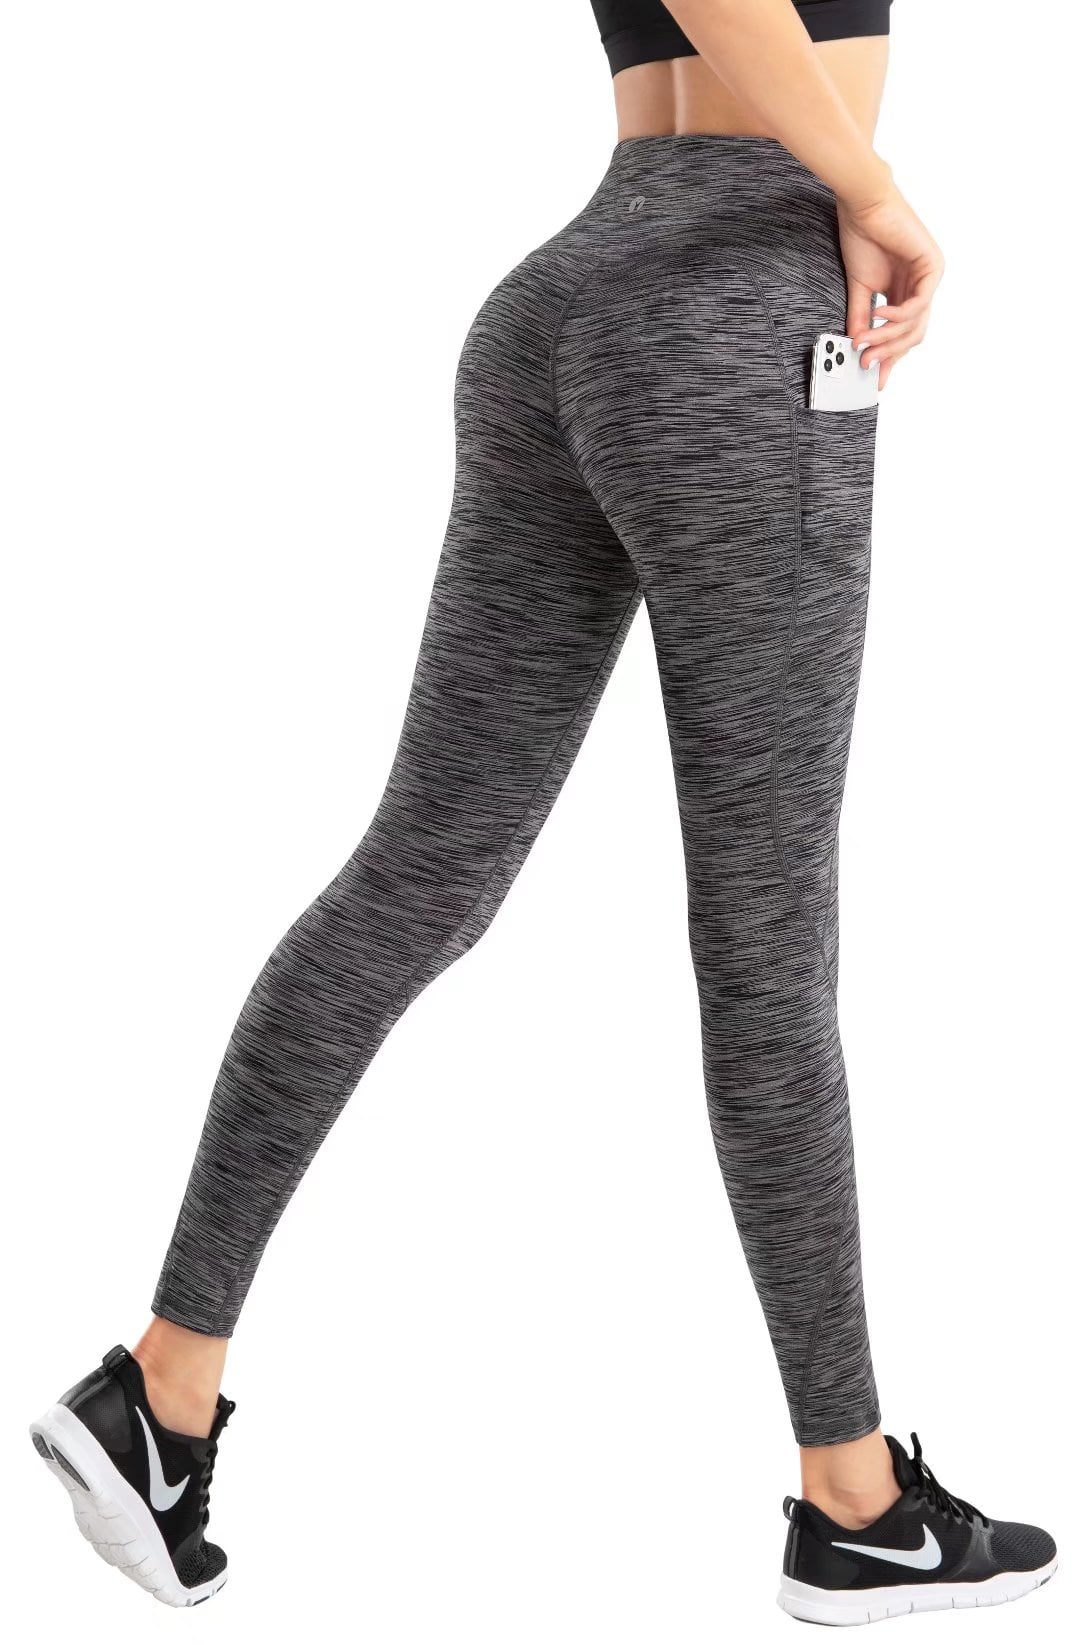 Essentials High Waist Yoga Workout Print Leggings with Pockets  Exercise Running Gym Tummy Control Pants 1364-Snake Print-S at   Women's Clothing store